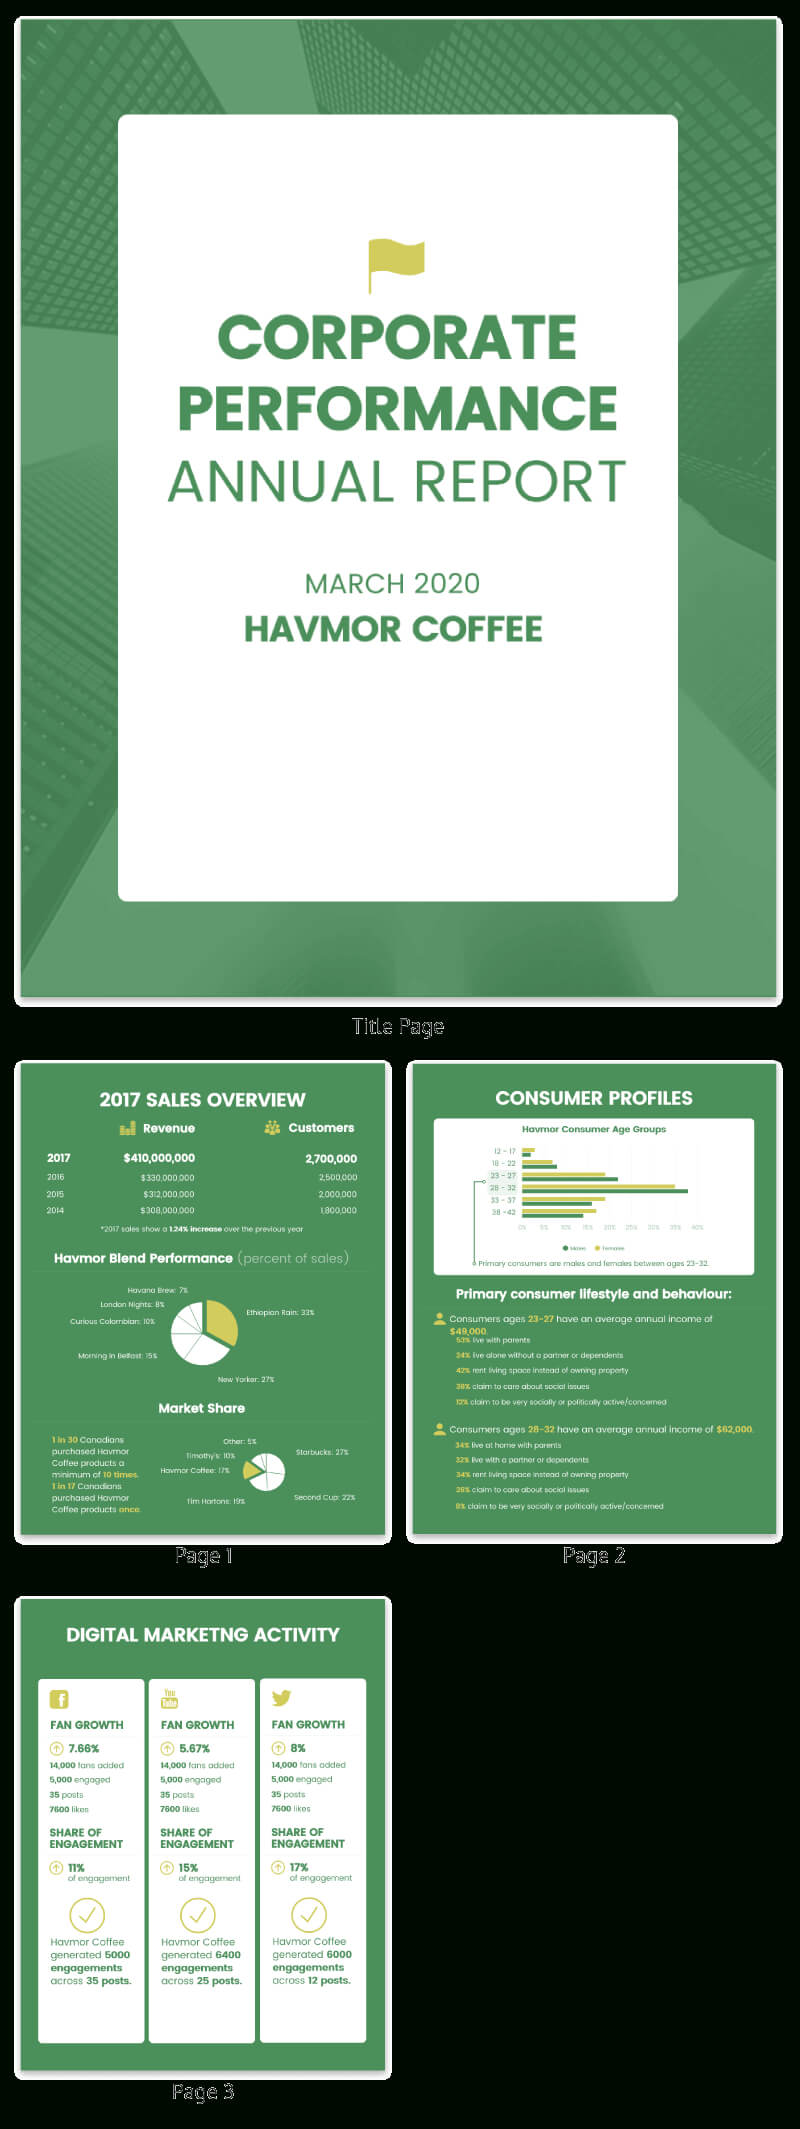 55+ Customizable Annual Report Design Templates, Examples & Tips Intended For Word Annual Report Template